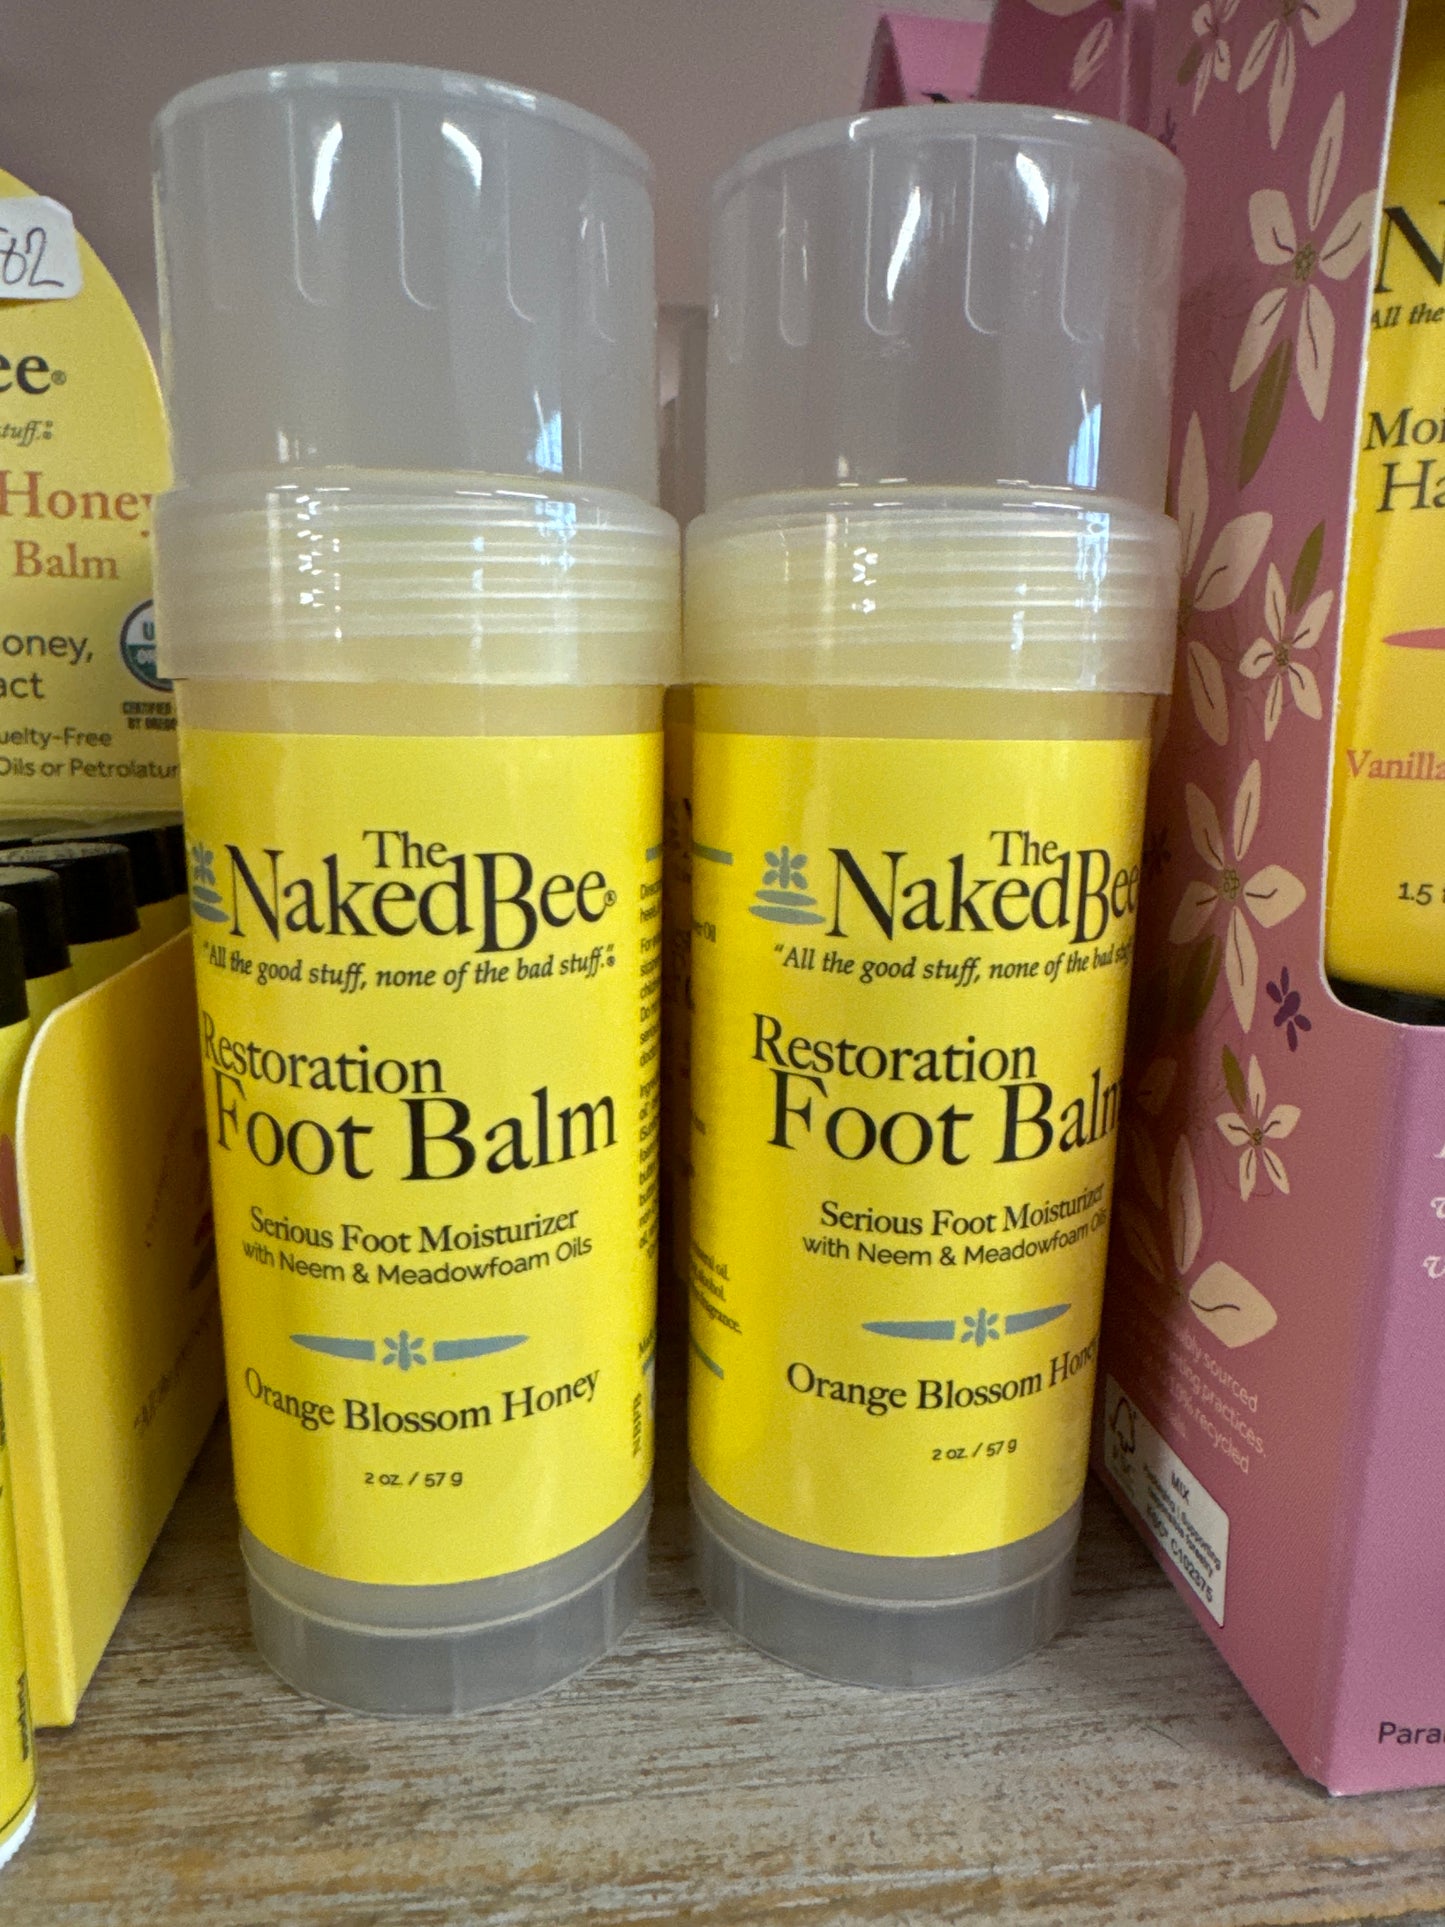 The naked bee foot balm